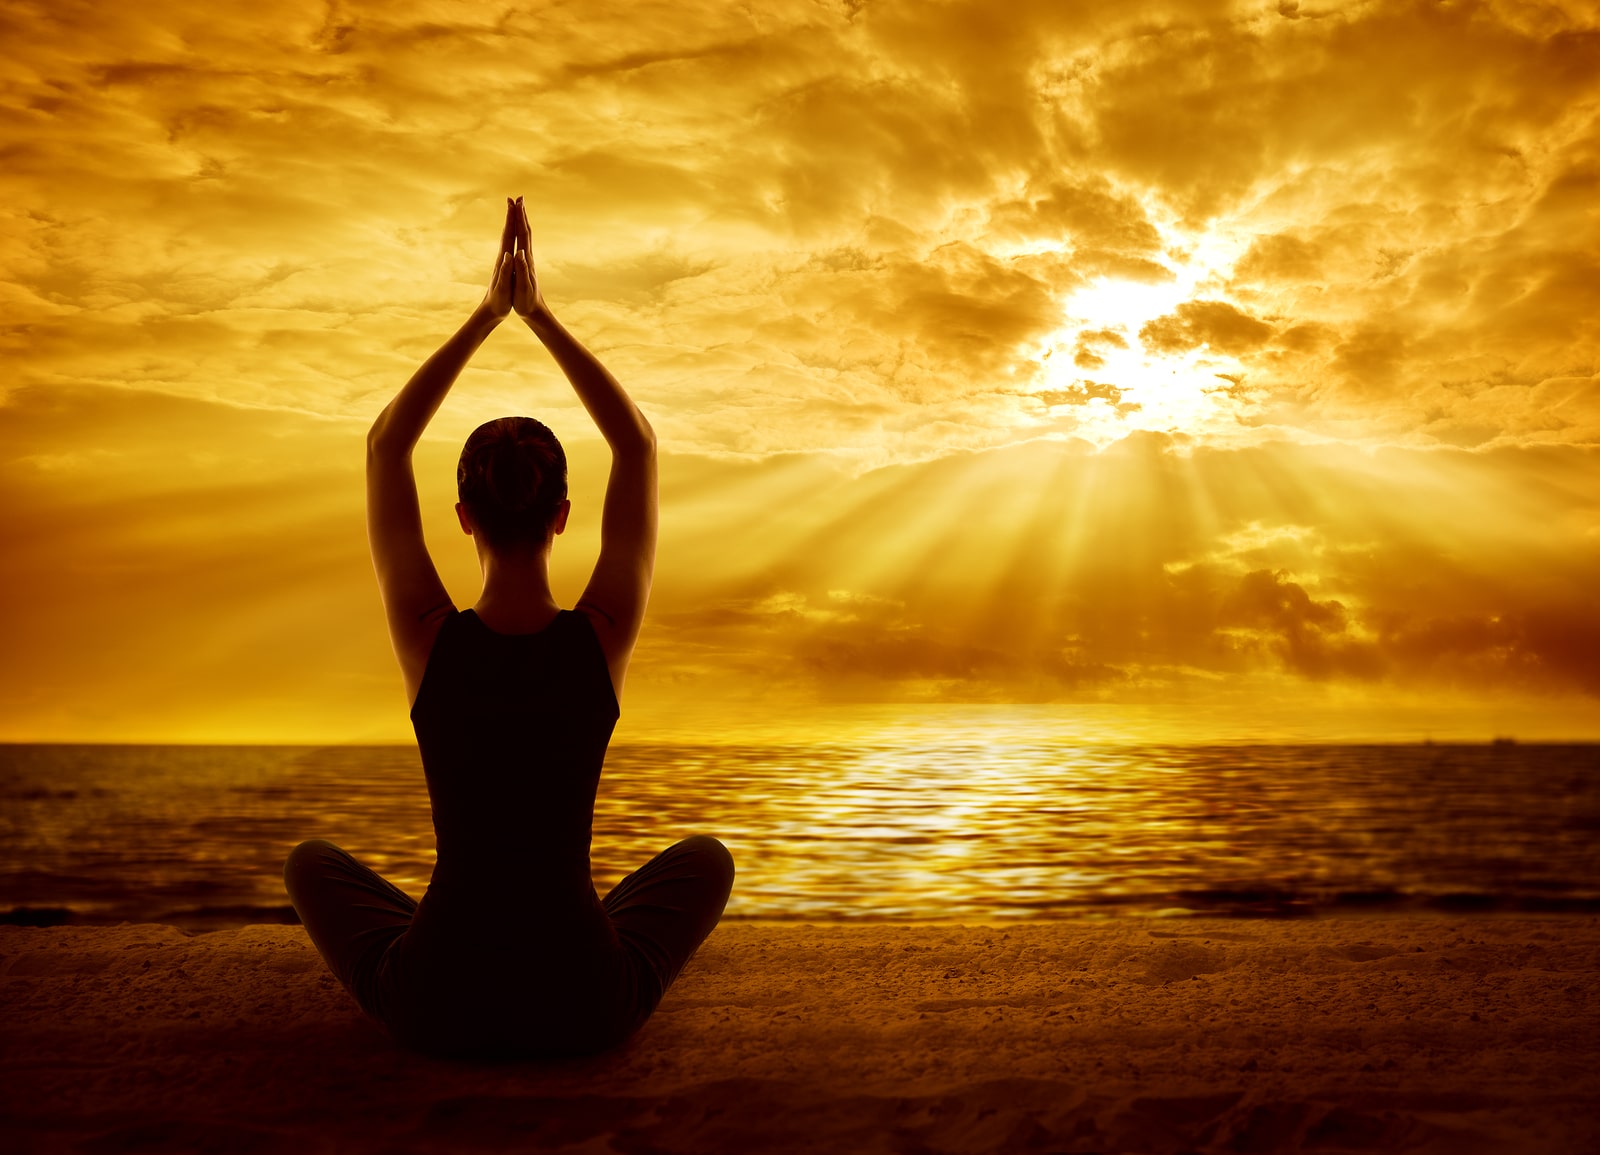 Yoga Meditation Concept, Woman Silhouette Meditating In Healthy